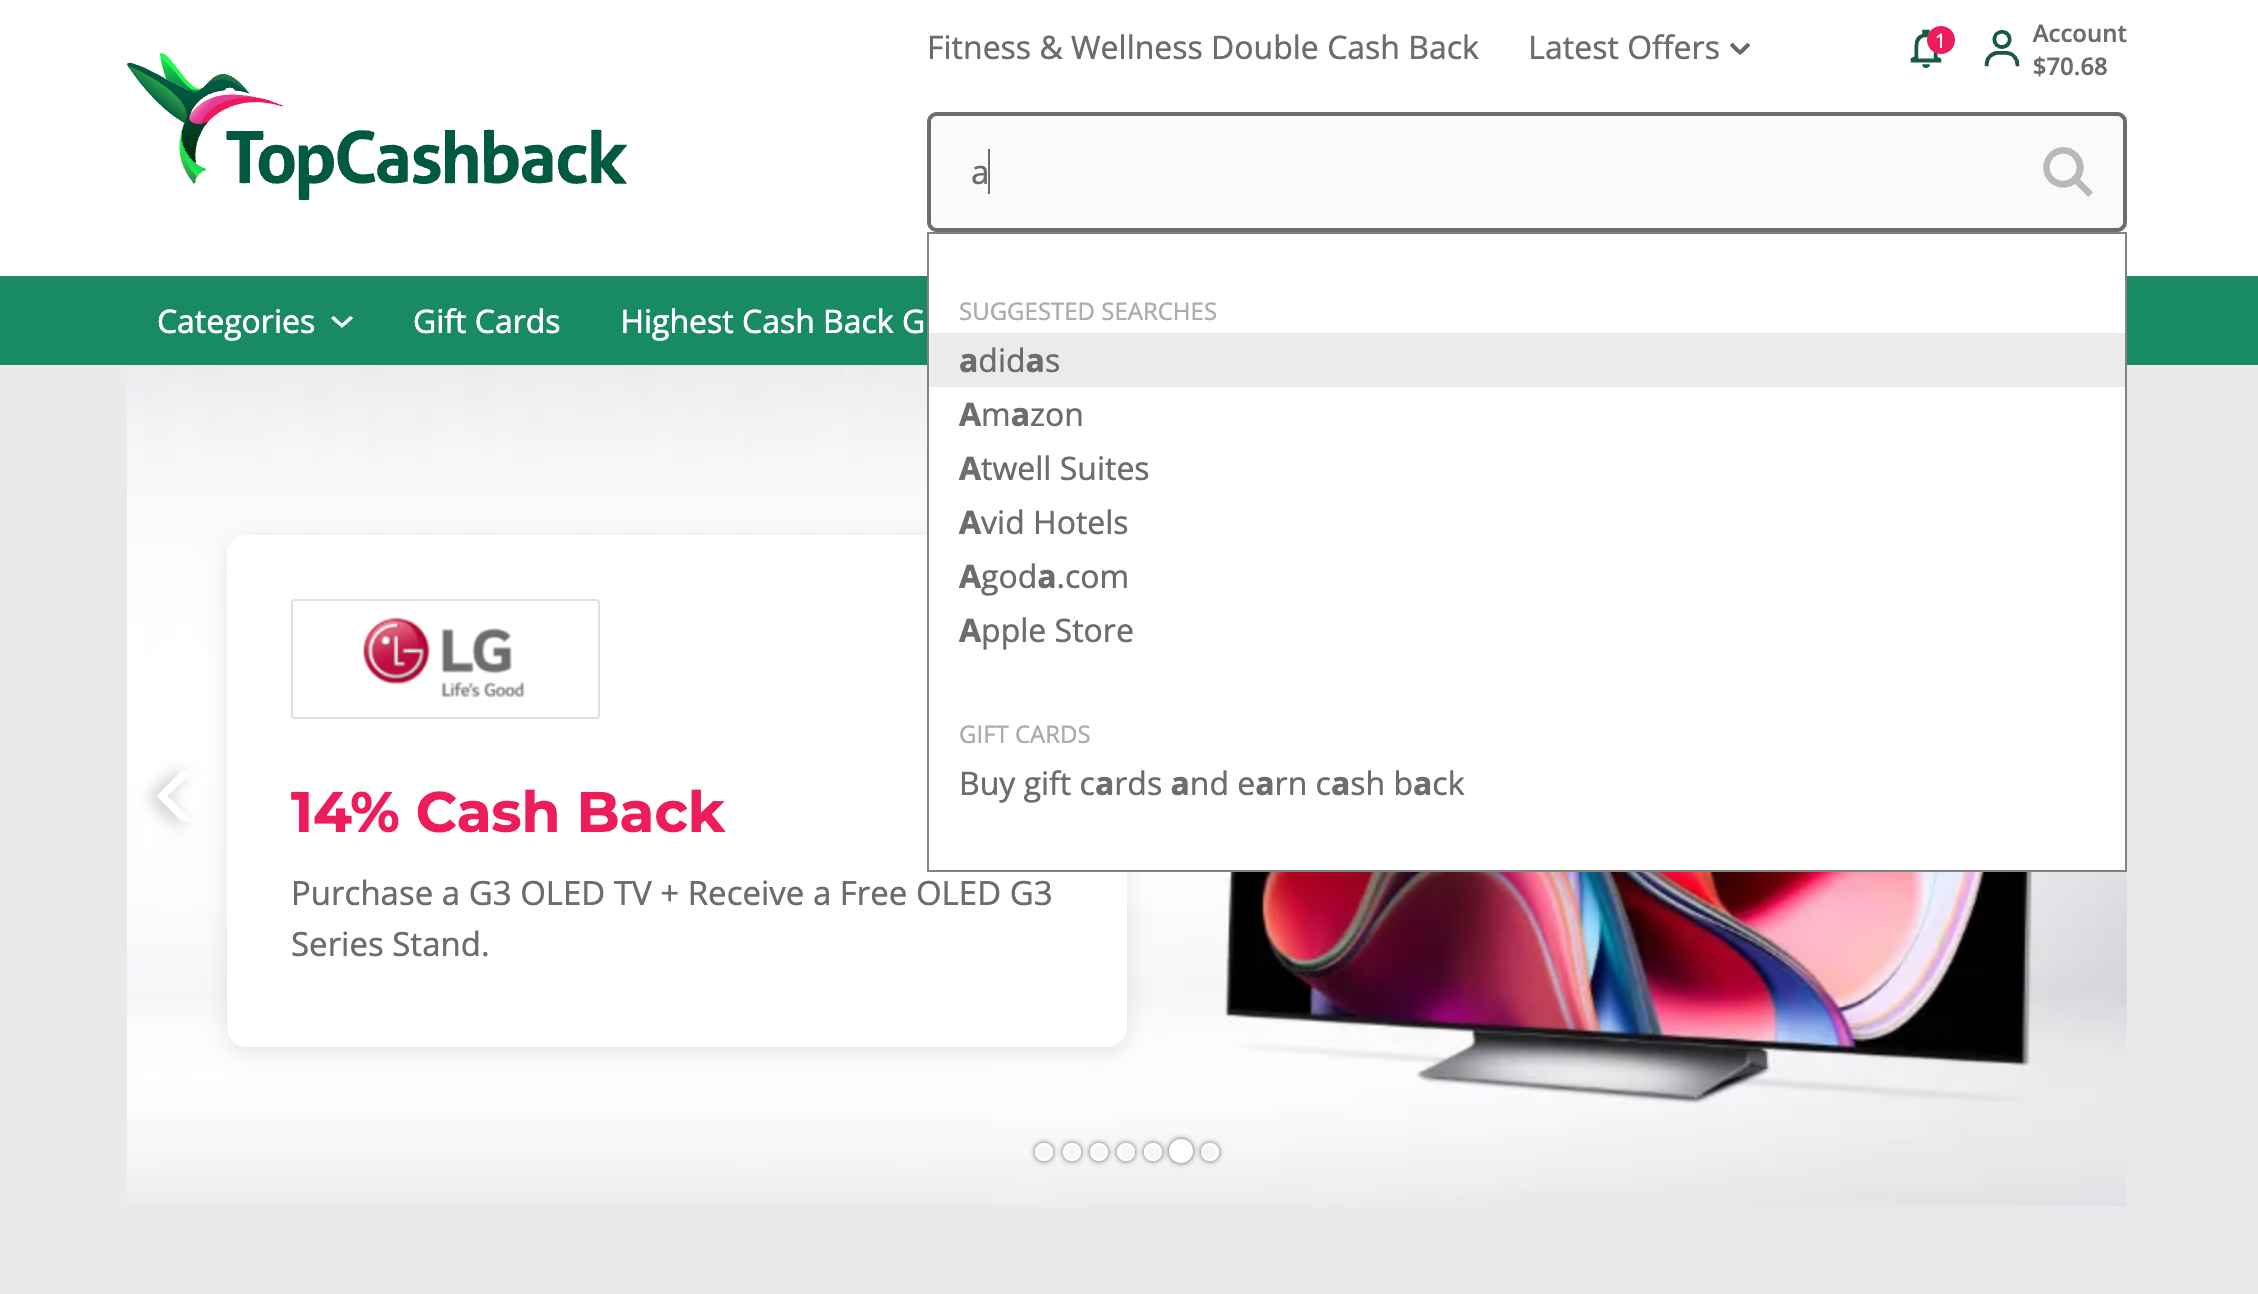 Searching for a merchant at the homepage of Topcashback